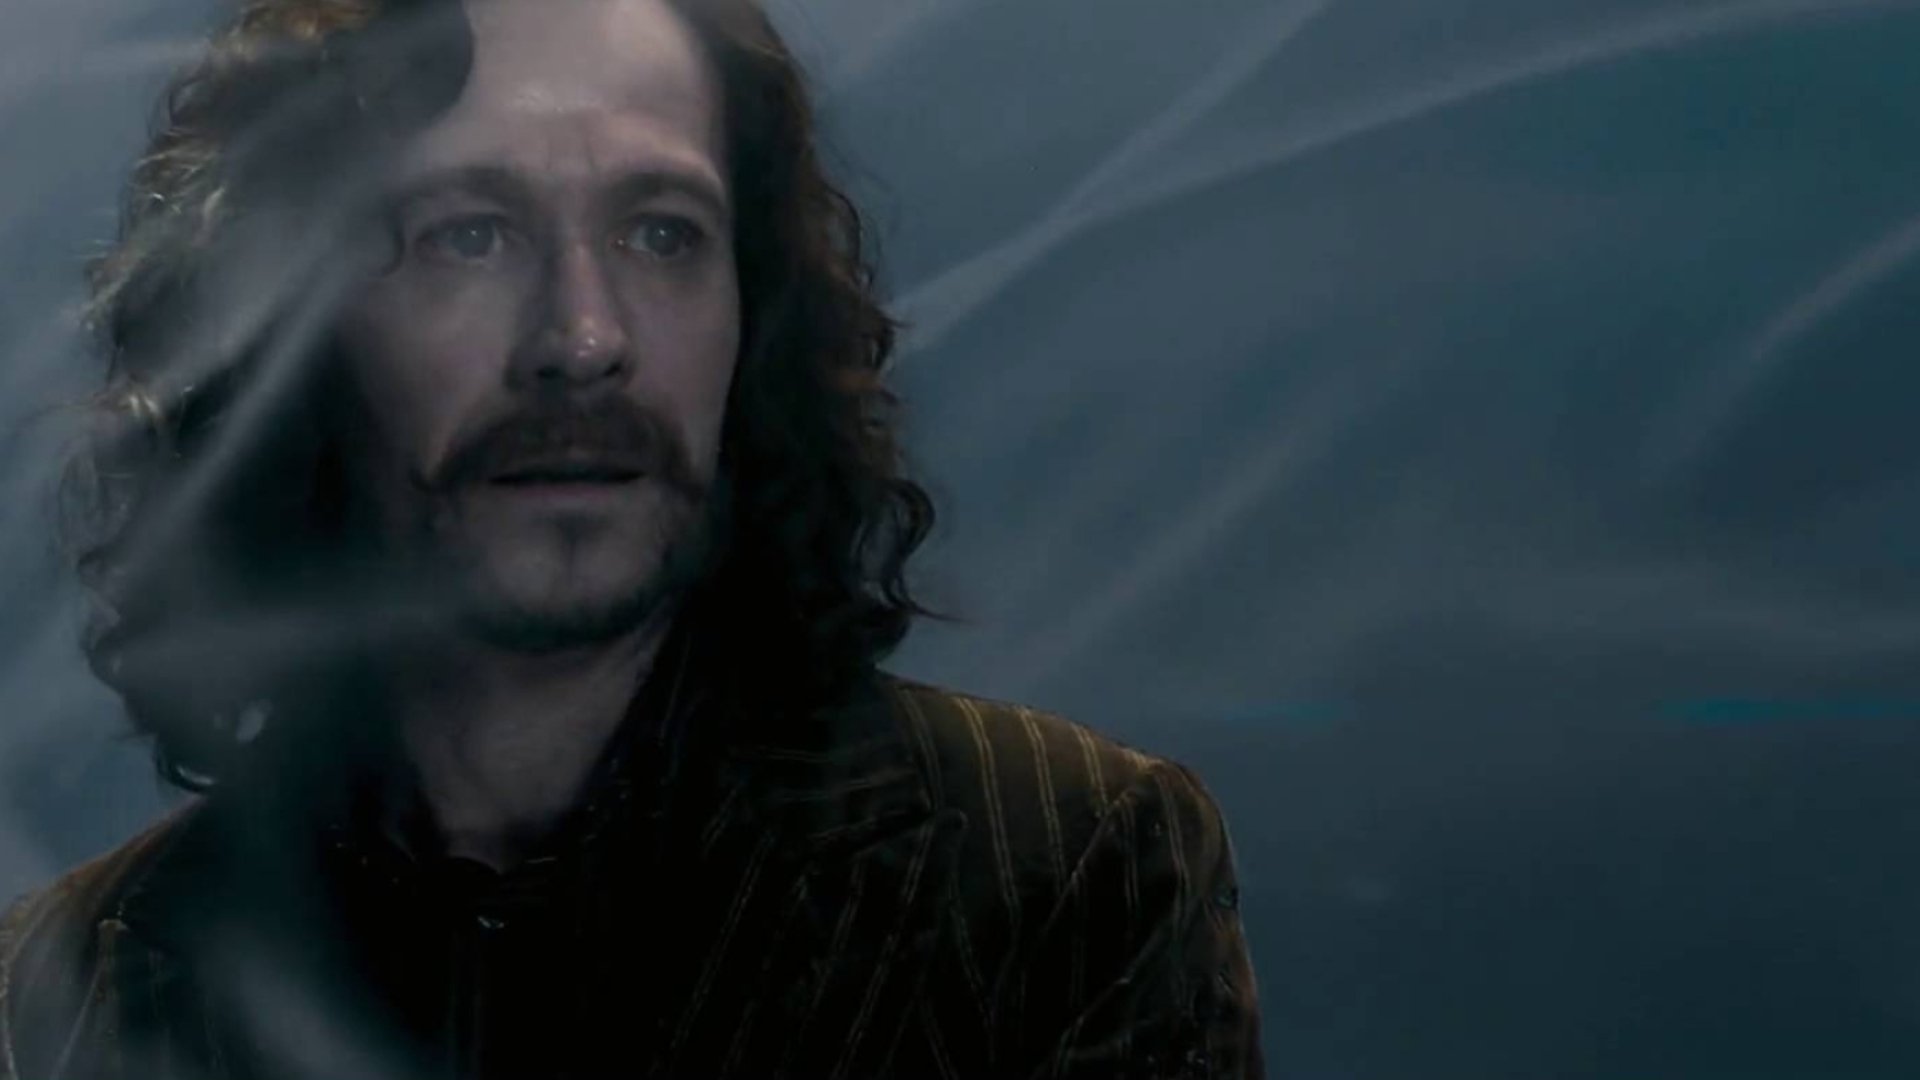 Sirius Black: Was falsely accused of betraying James and Lily Potter to Lord Voldemort. 1920x1080 Full HD Background.